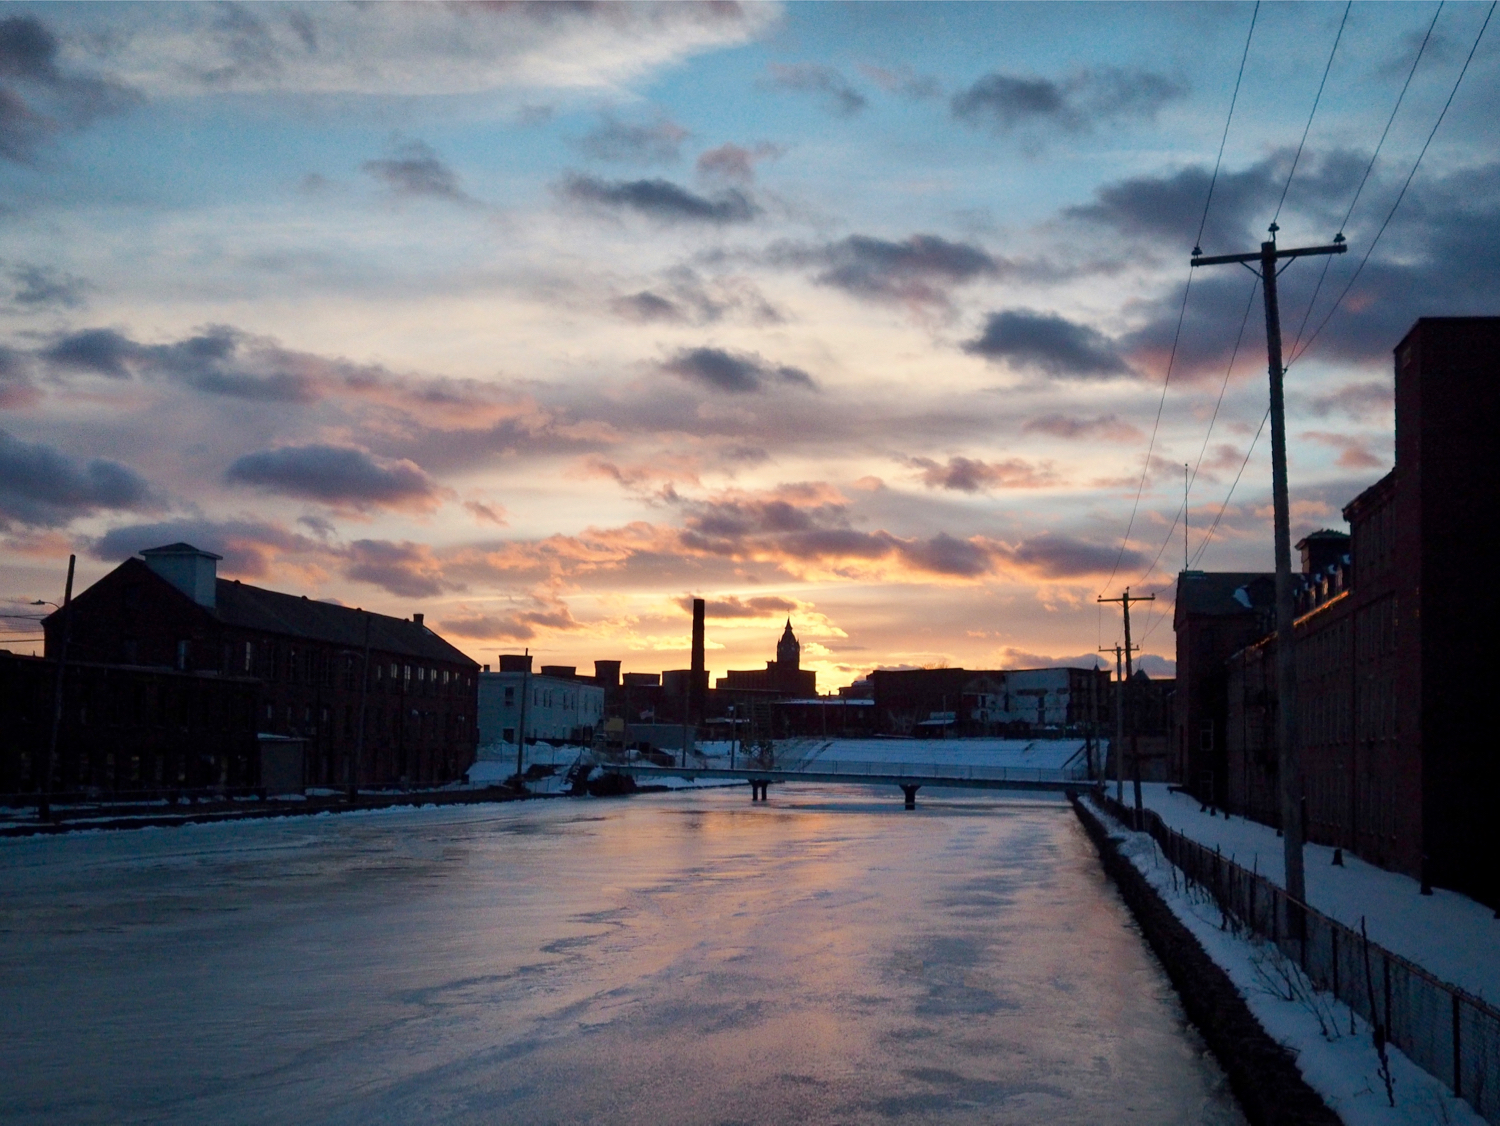 Sunset over a Holyoke canal — copyright Trace Meek